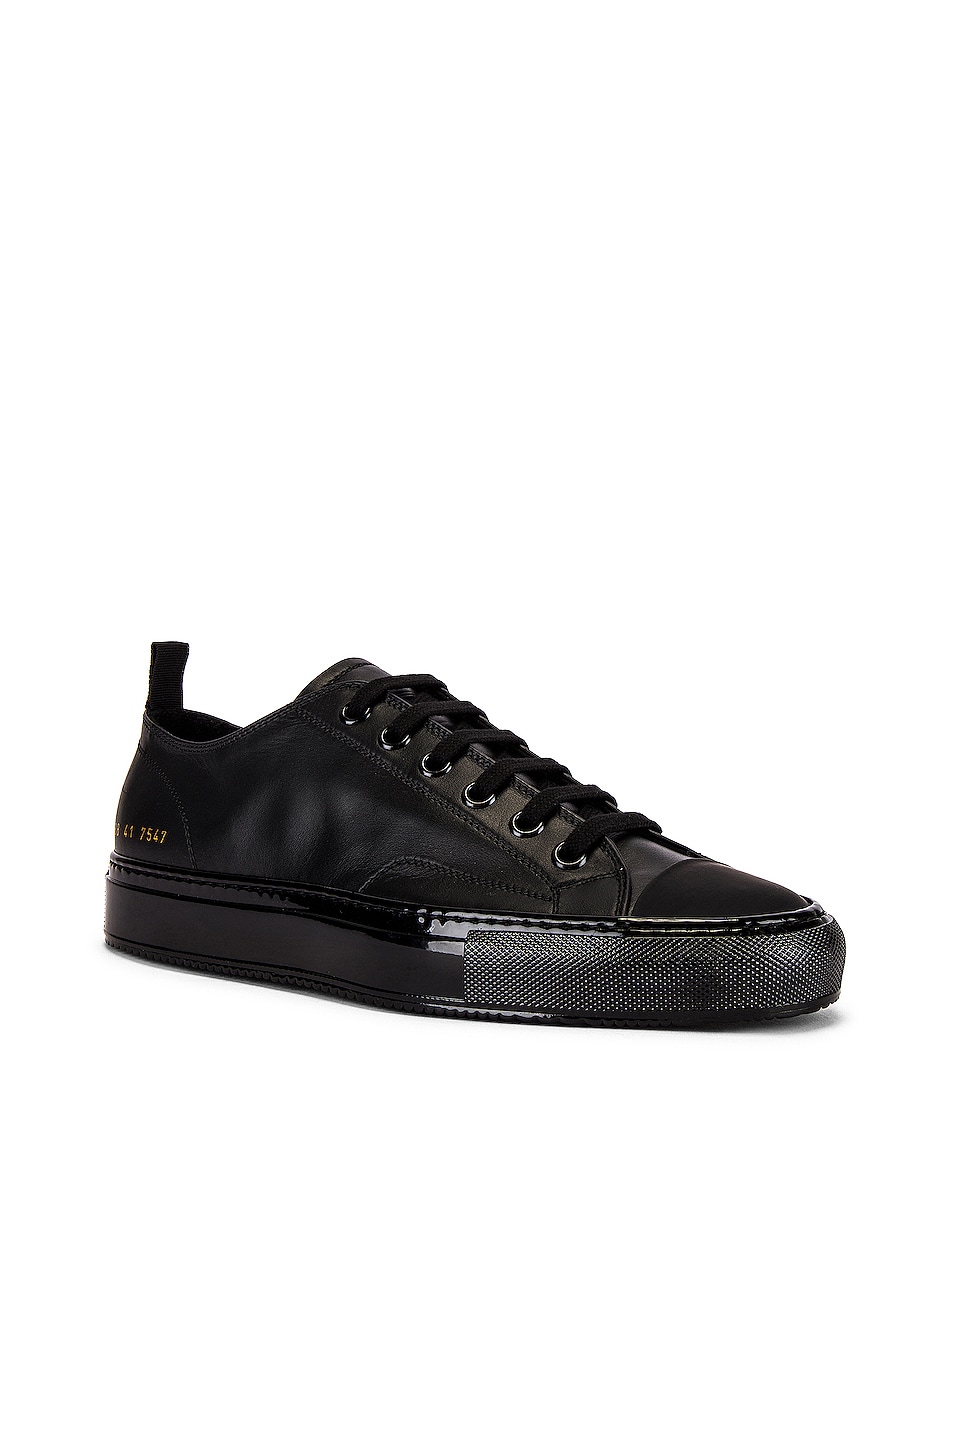 Image 1 of Common Projects Tournament Low Leather Shiny Sneaker in Black & Black